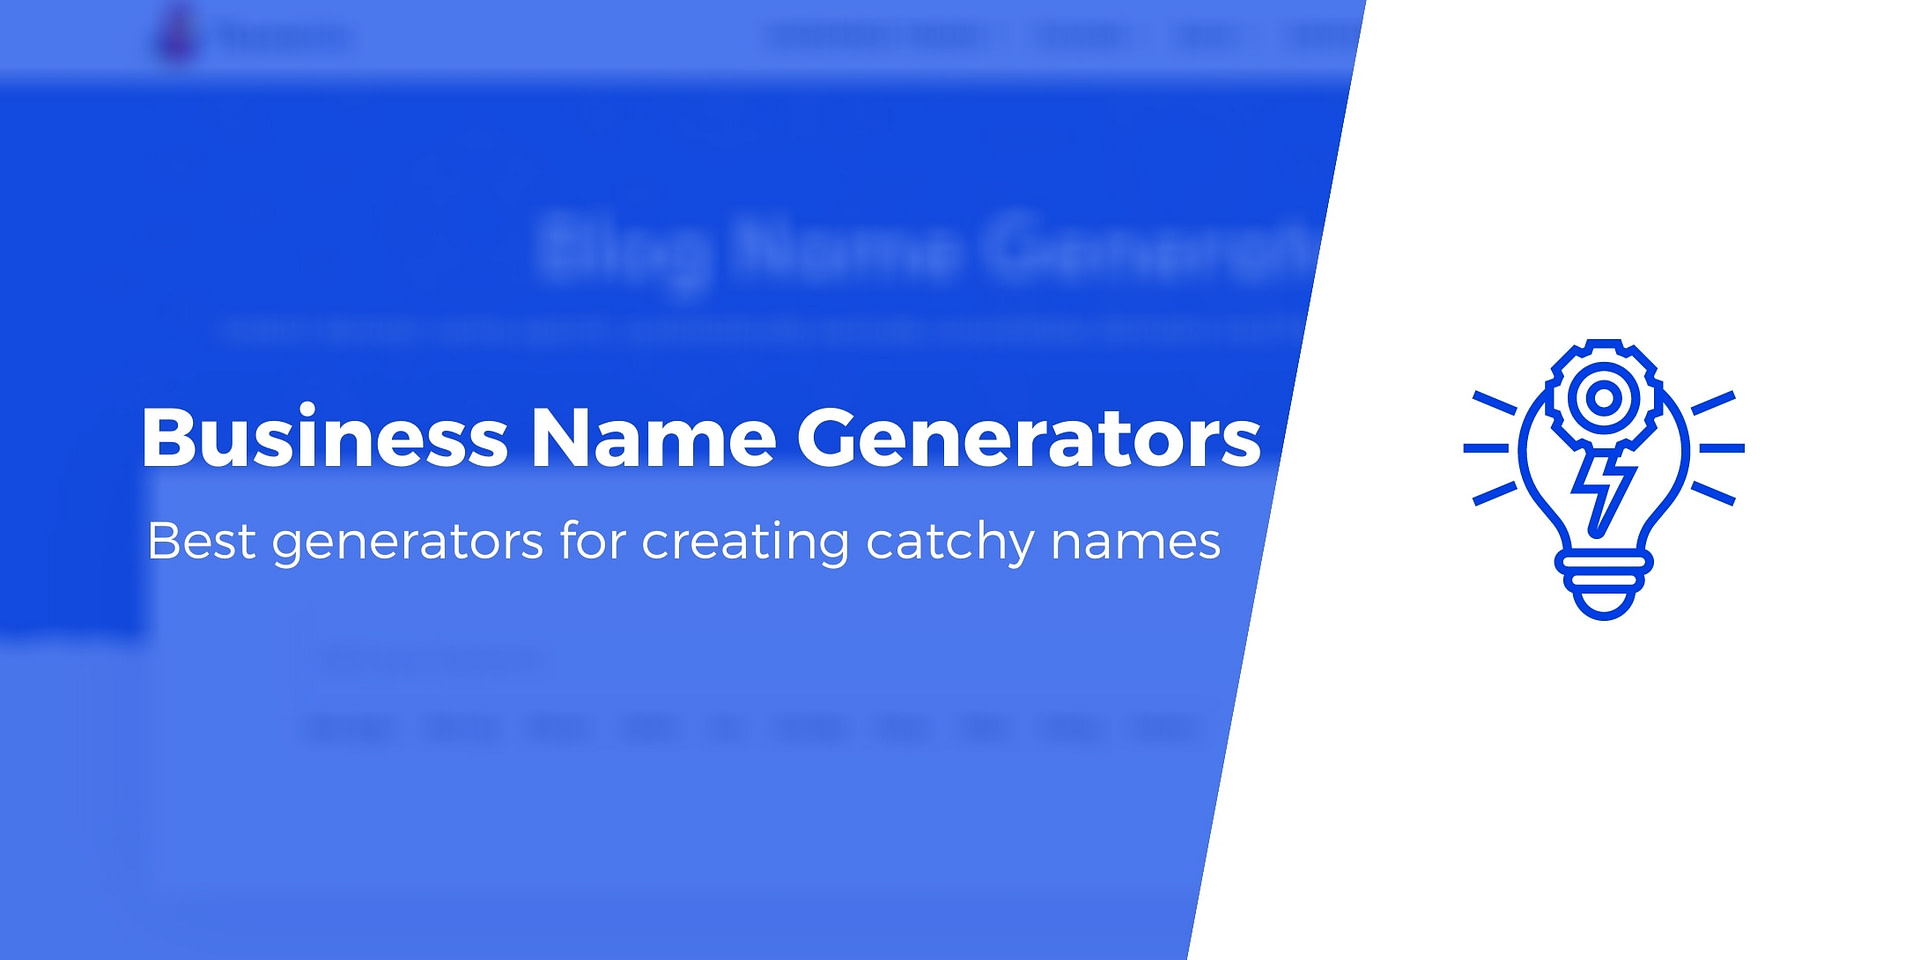 9 Best Business Name Generator Tools for Catchy Name Ideas